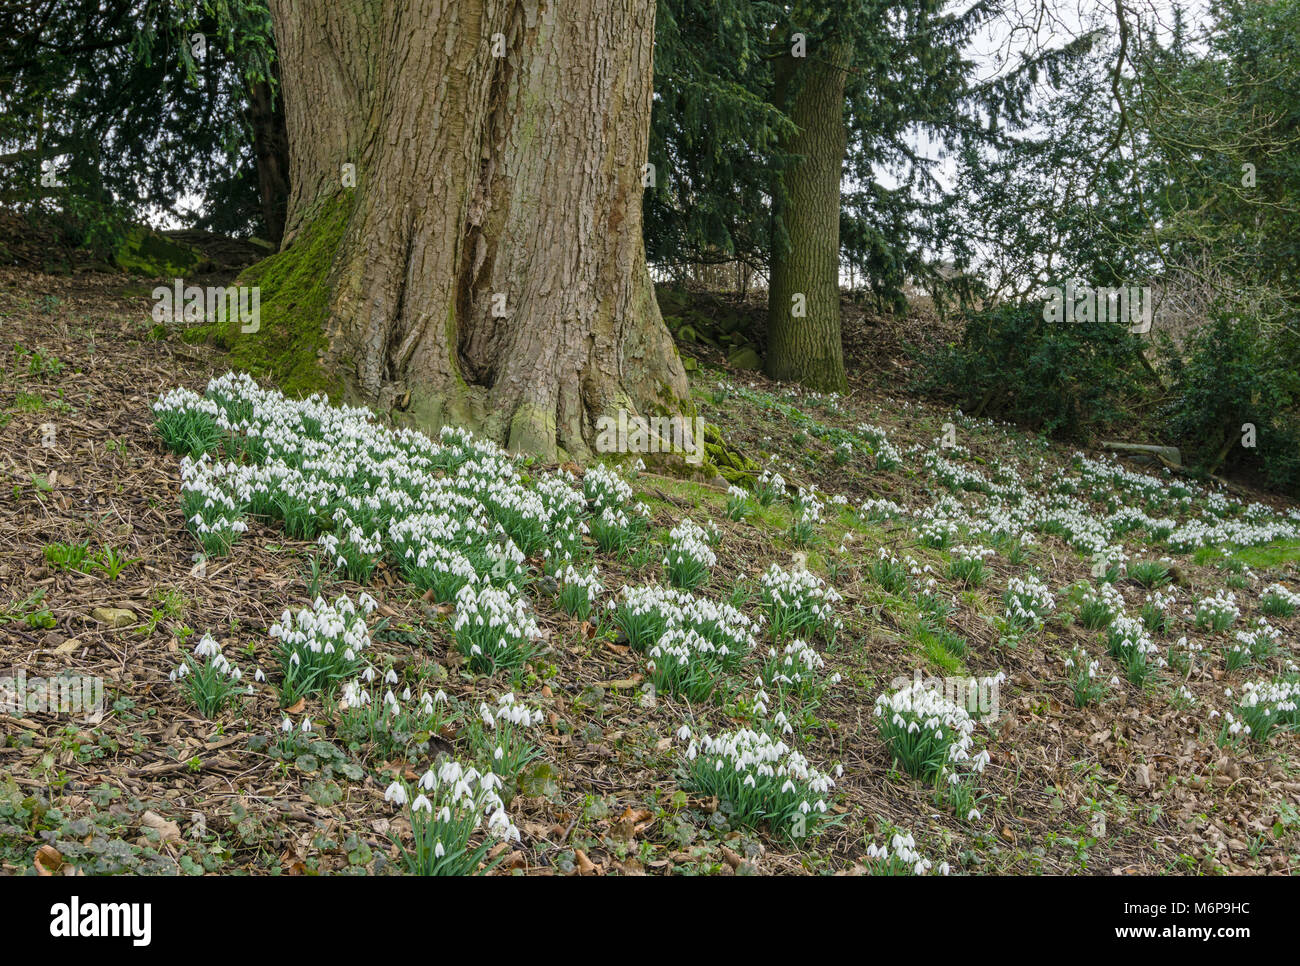 Winter at Easton Walled Gardens with its famous displays of flowering snowdrops carpeting the woods; near Grantham, Lincolnshire. Stock Photo